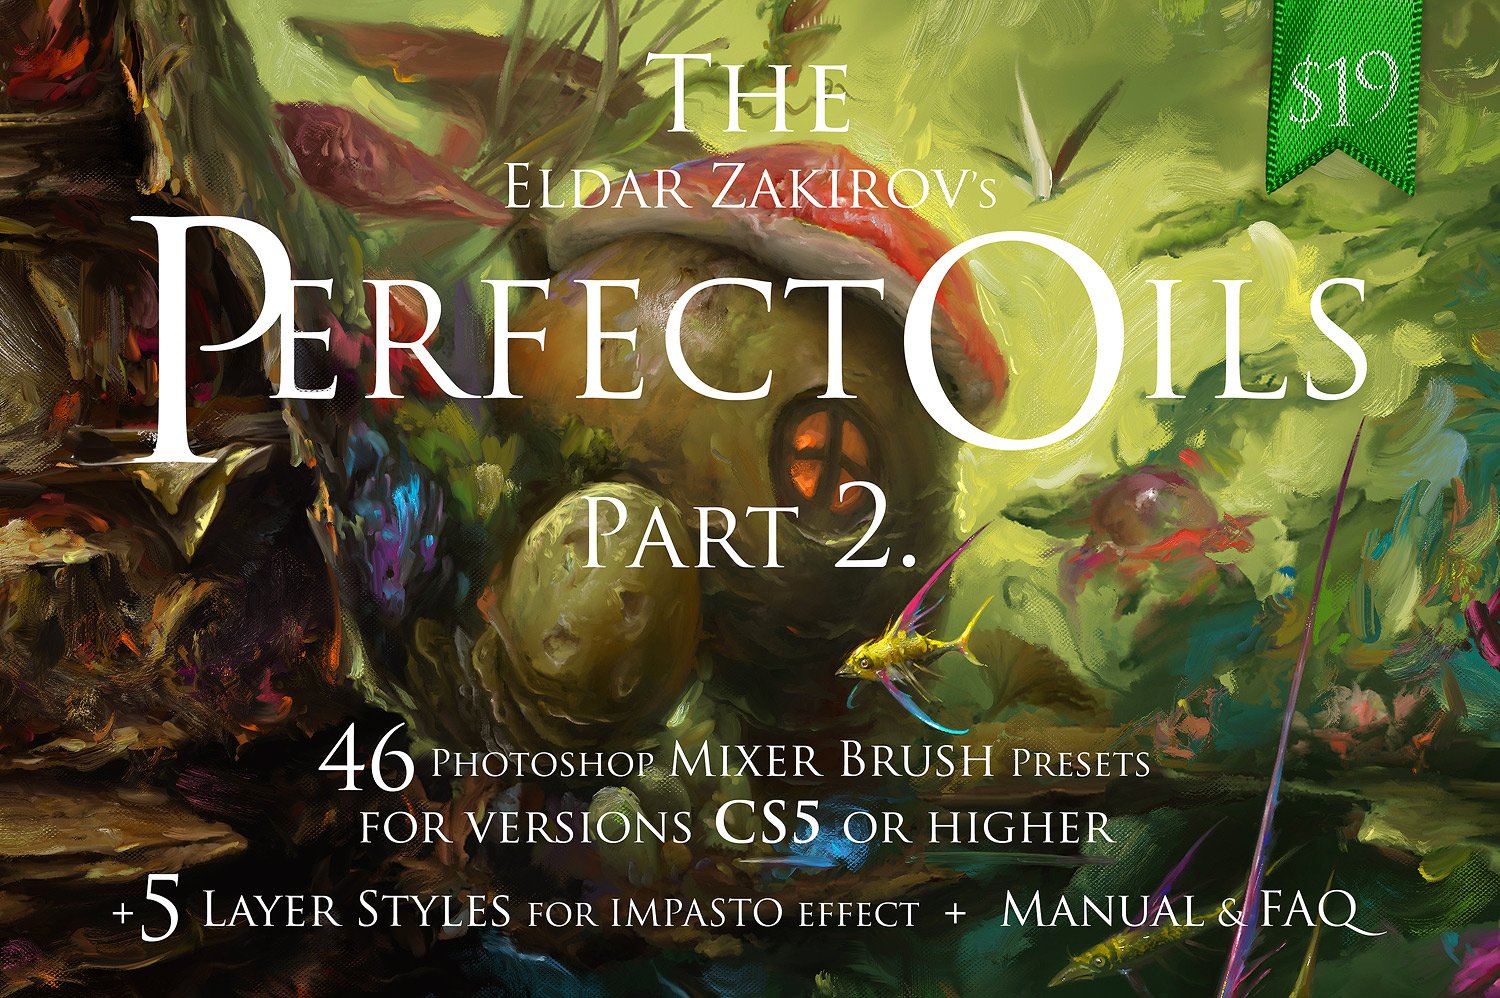 Perfect Oils Part2: 46+ MixerBrushescover image.